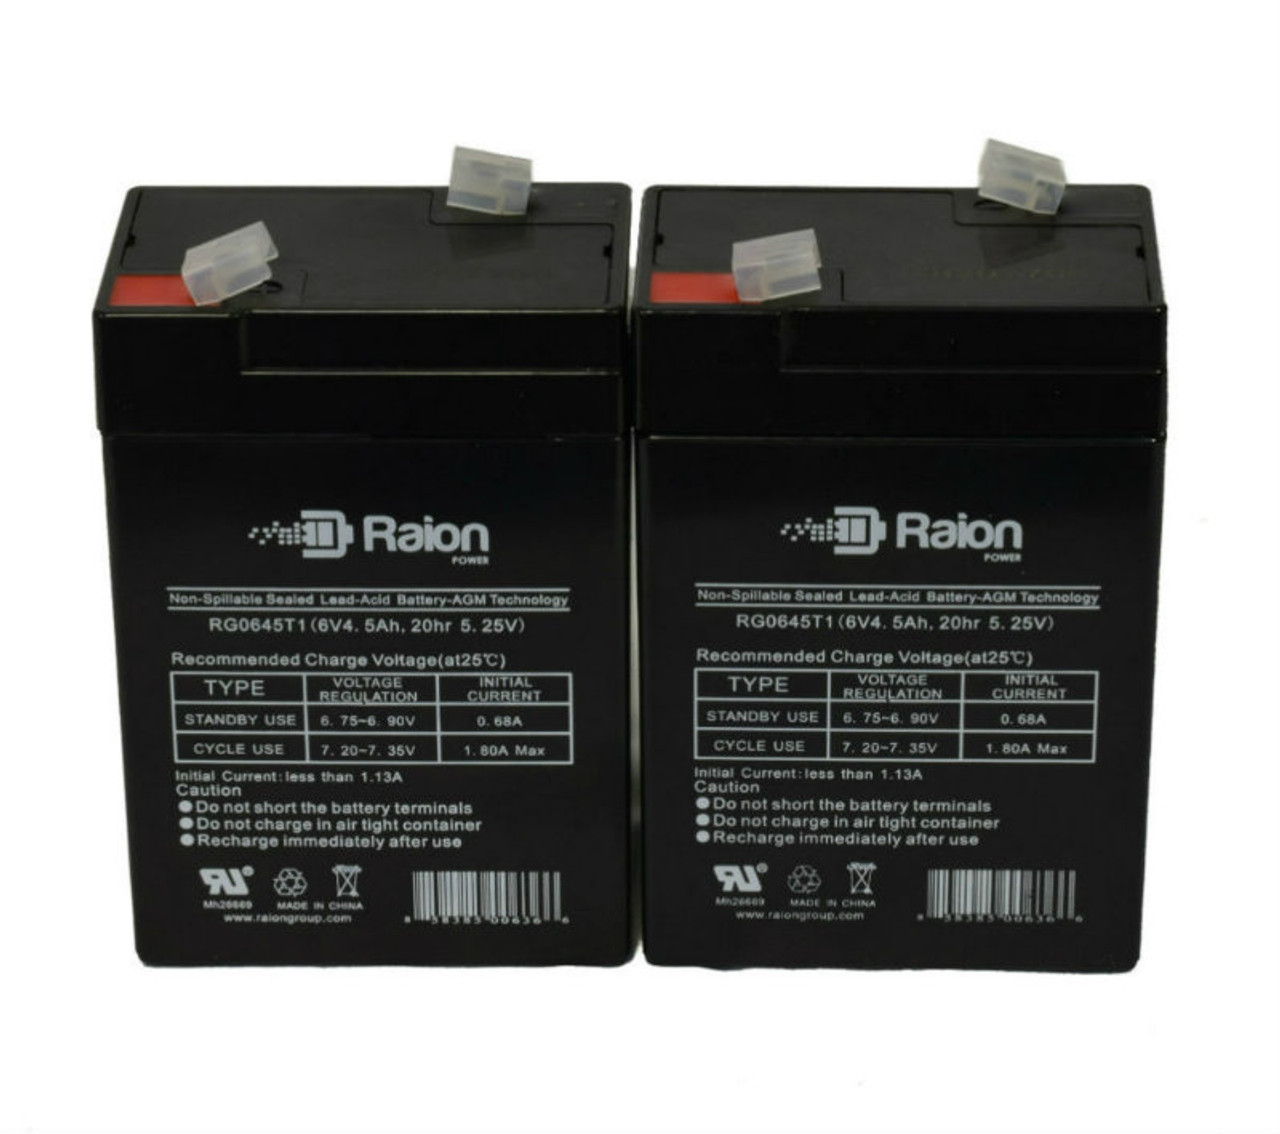 Raion Power 6V 4.5Ah Replacement Emergency Light Battery for Para Systems S65 - 2 Pack